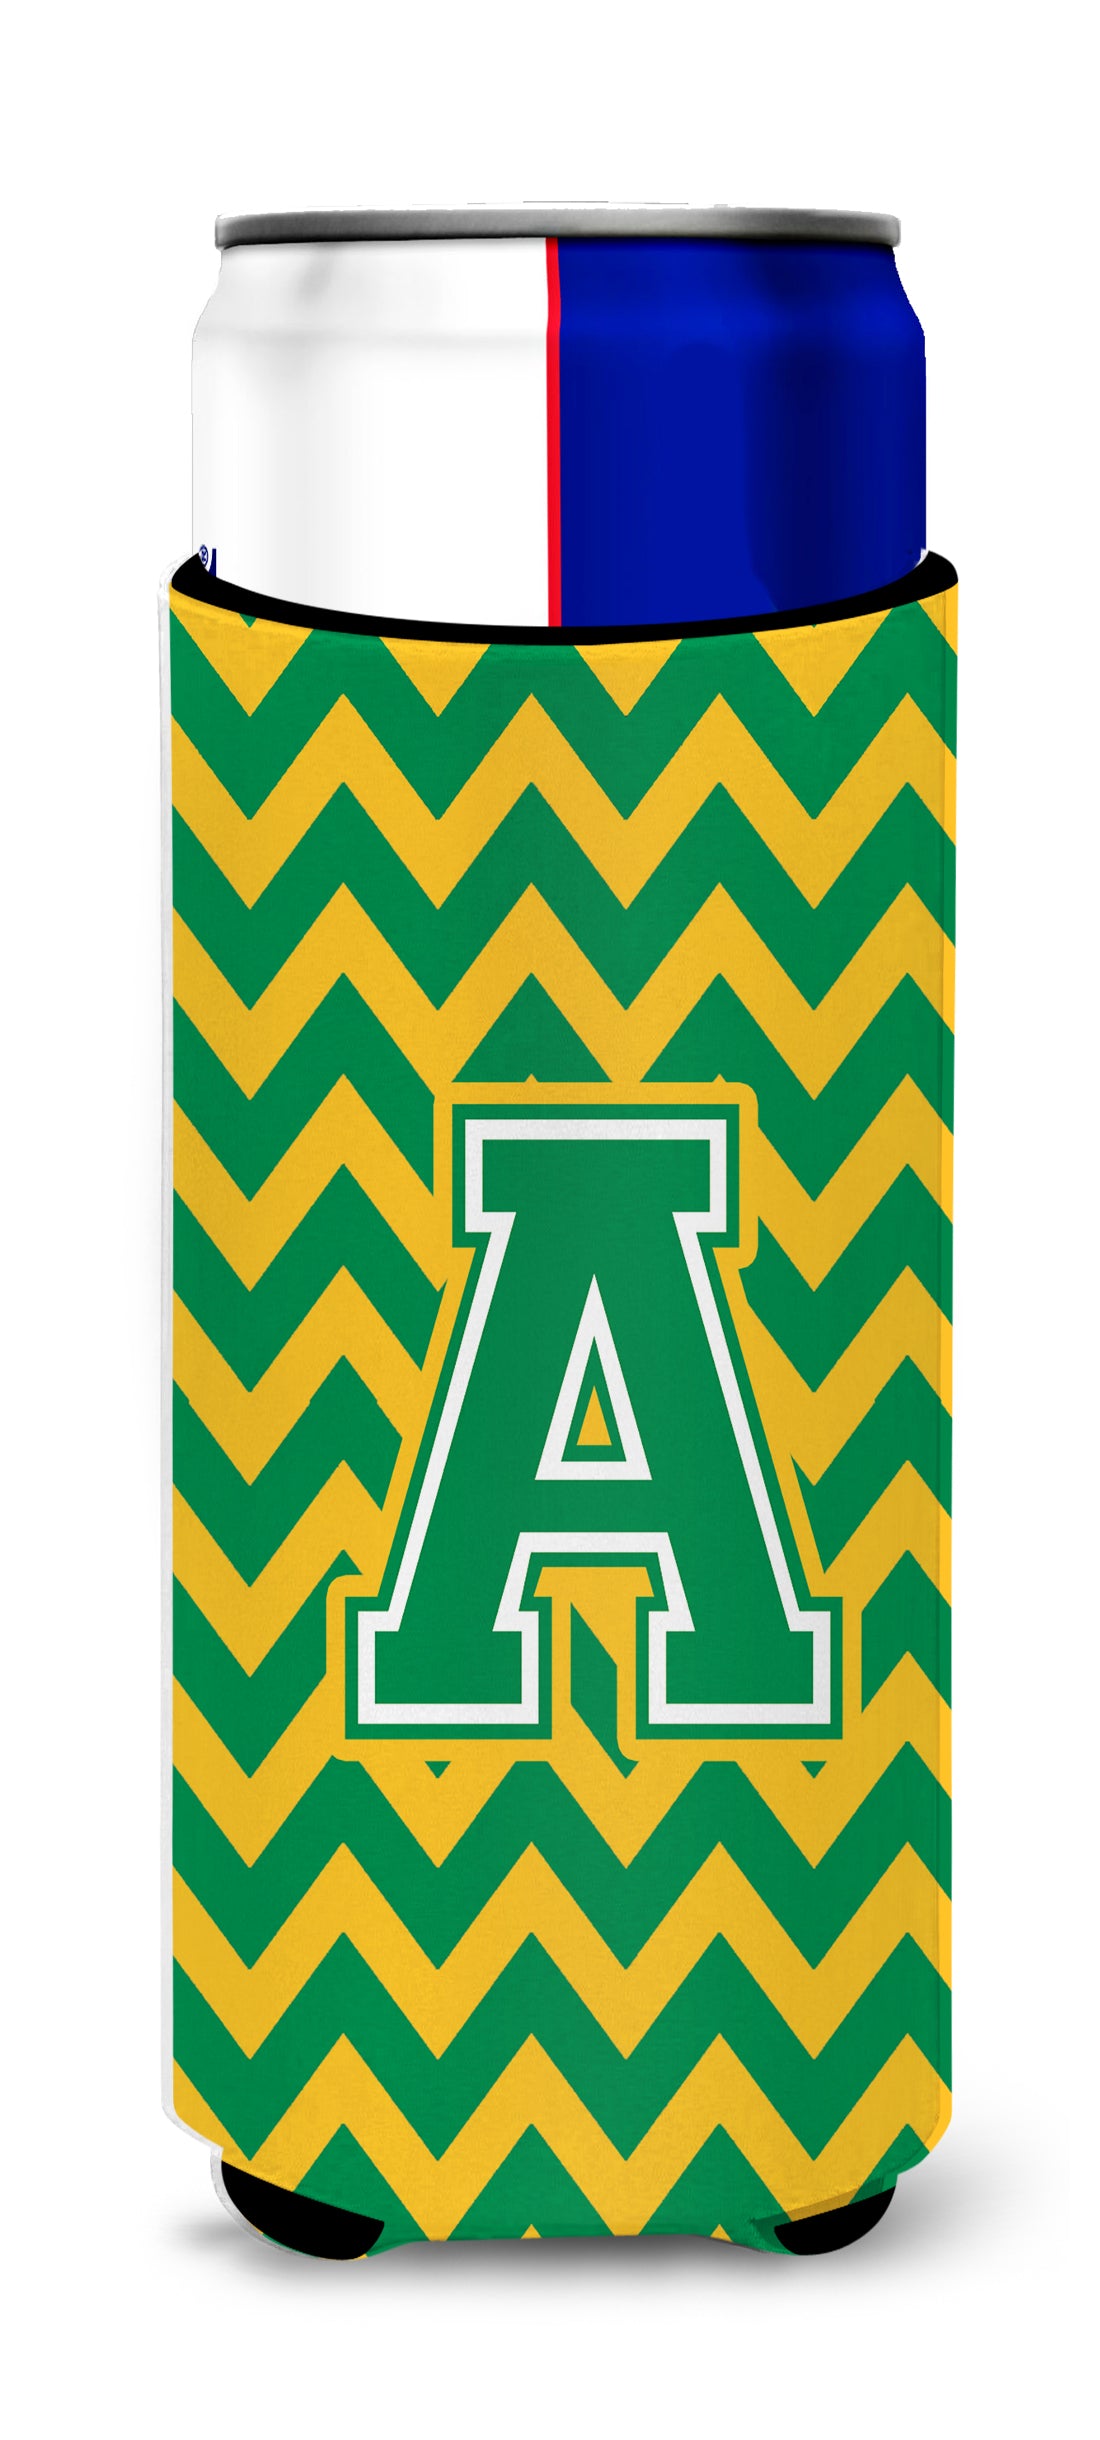 Letter A Chevron Green and Gold Ultra Beverage Insulators for slim cans CJ1059-AMUK.